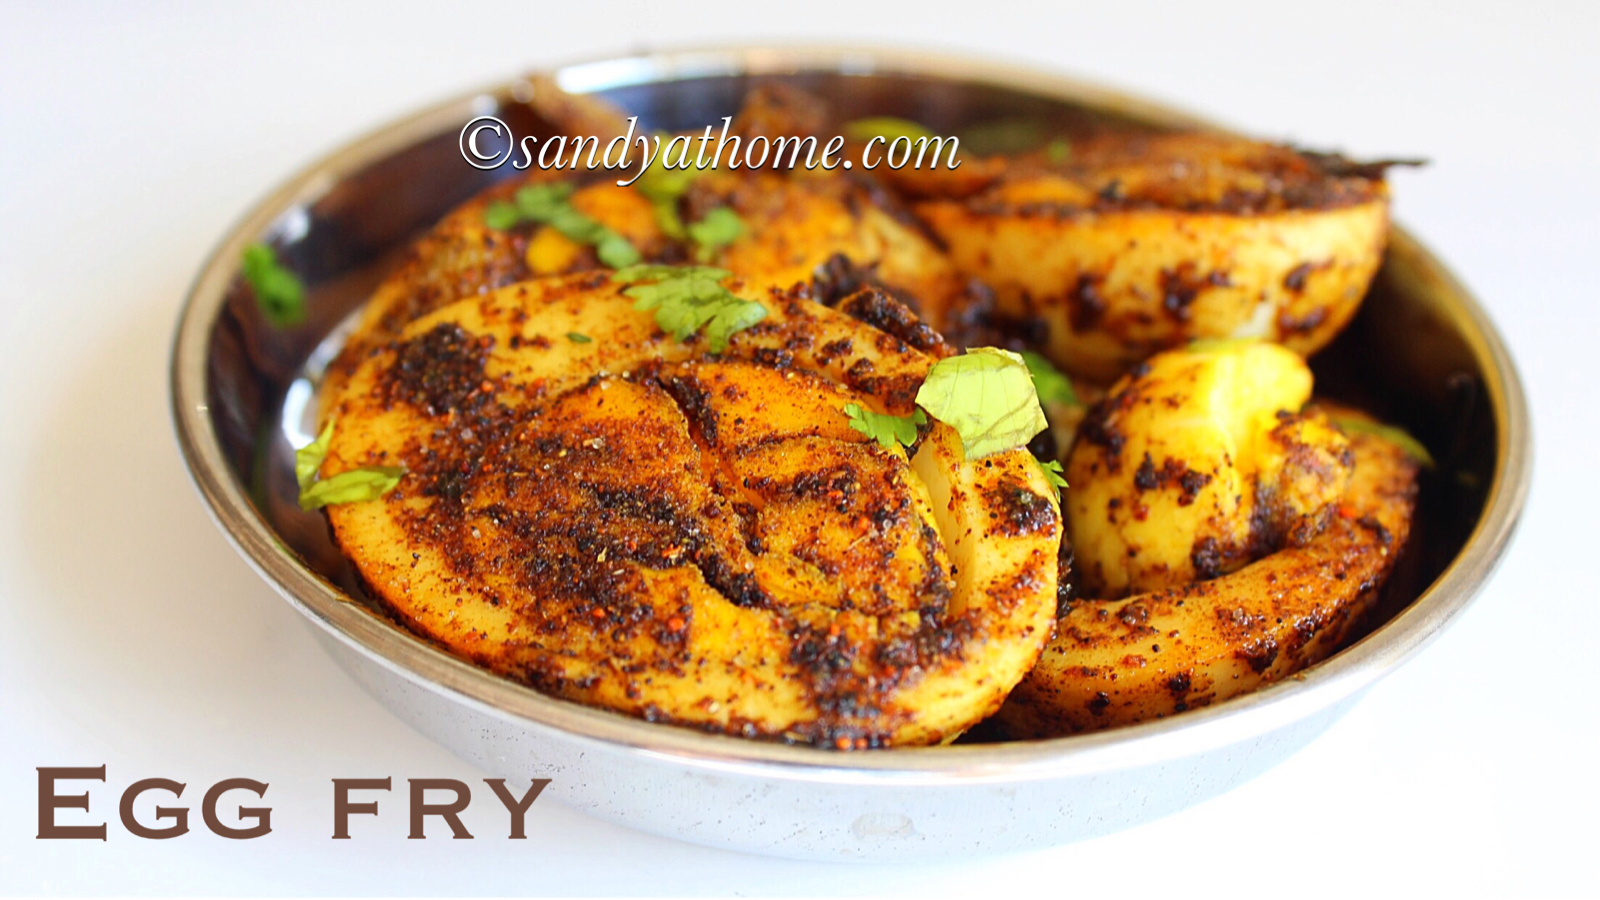 egg fry recipe, spicy egg fry